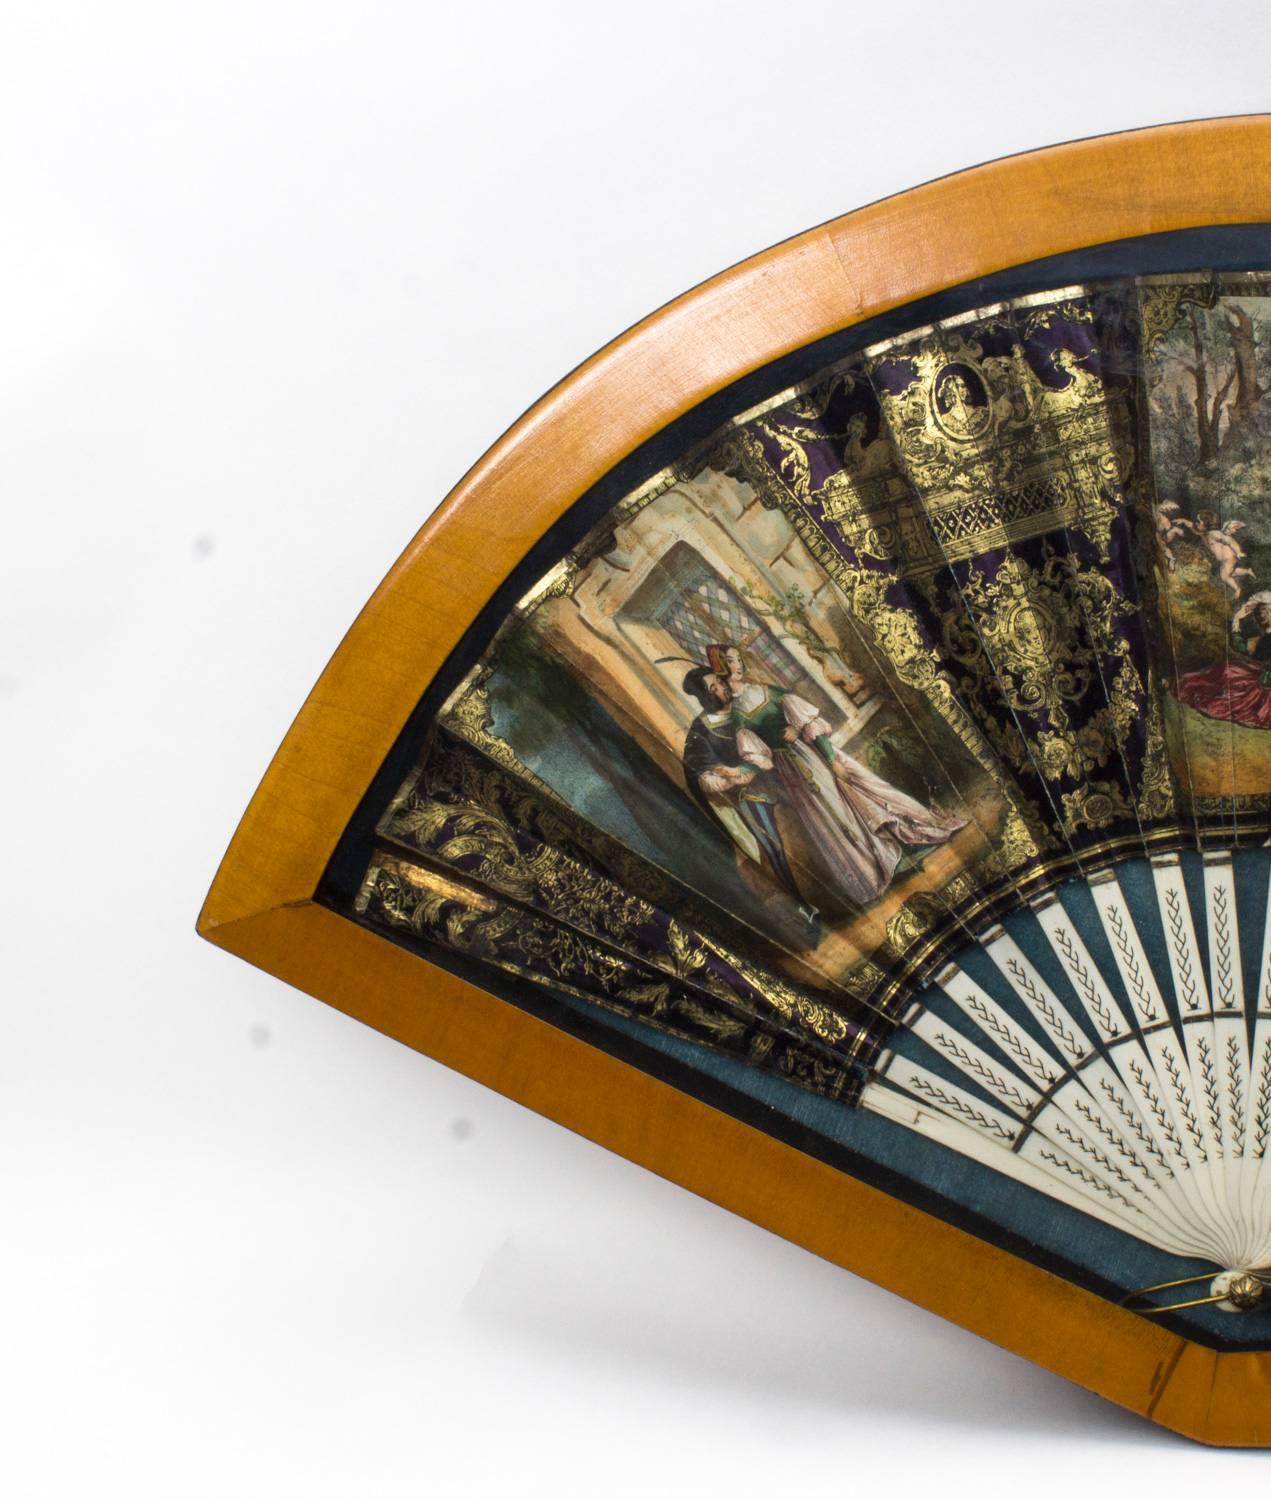 This is a beautiful decorative French mother-of-pearl fan set in a satinwood cased frame, circa 1880 in date.

The fan is made from vellum and is beautifully hand-painted and gilded with three scenes of lovers, on richly gilt shaped and pierced